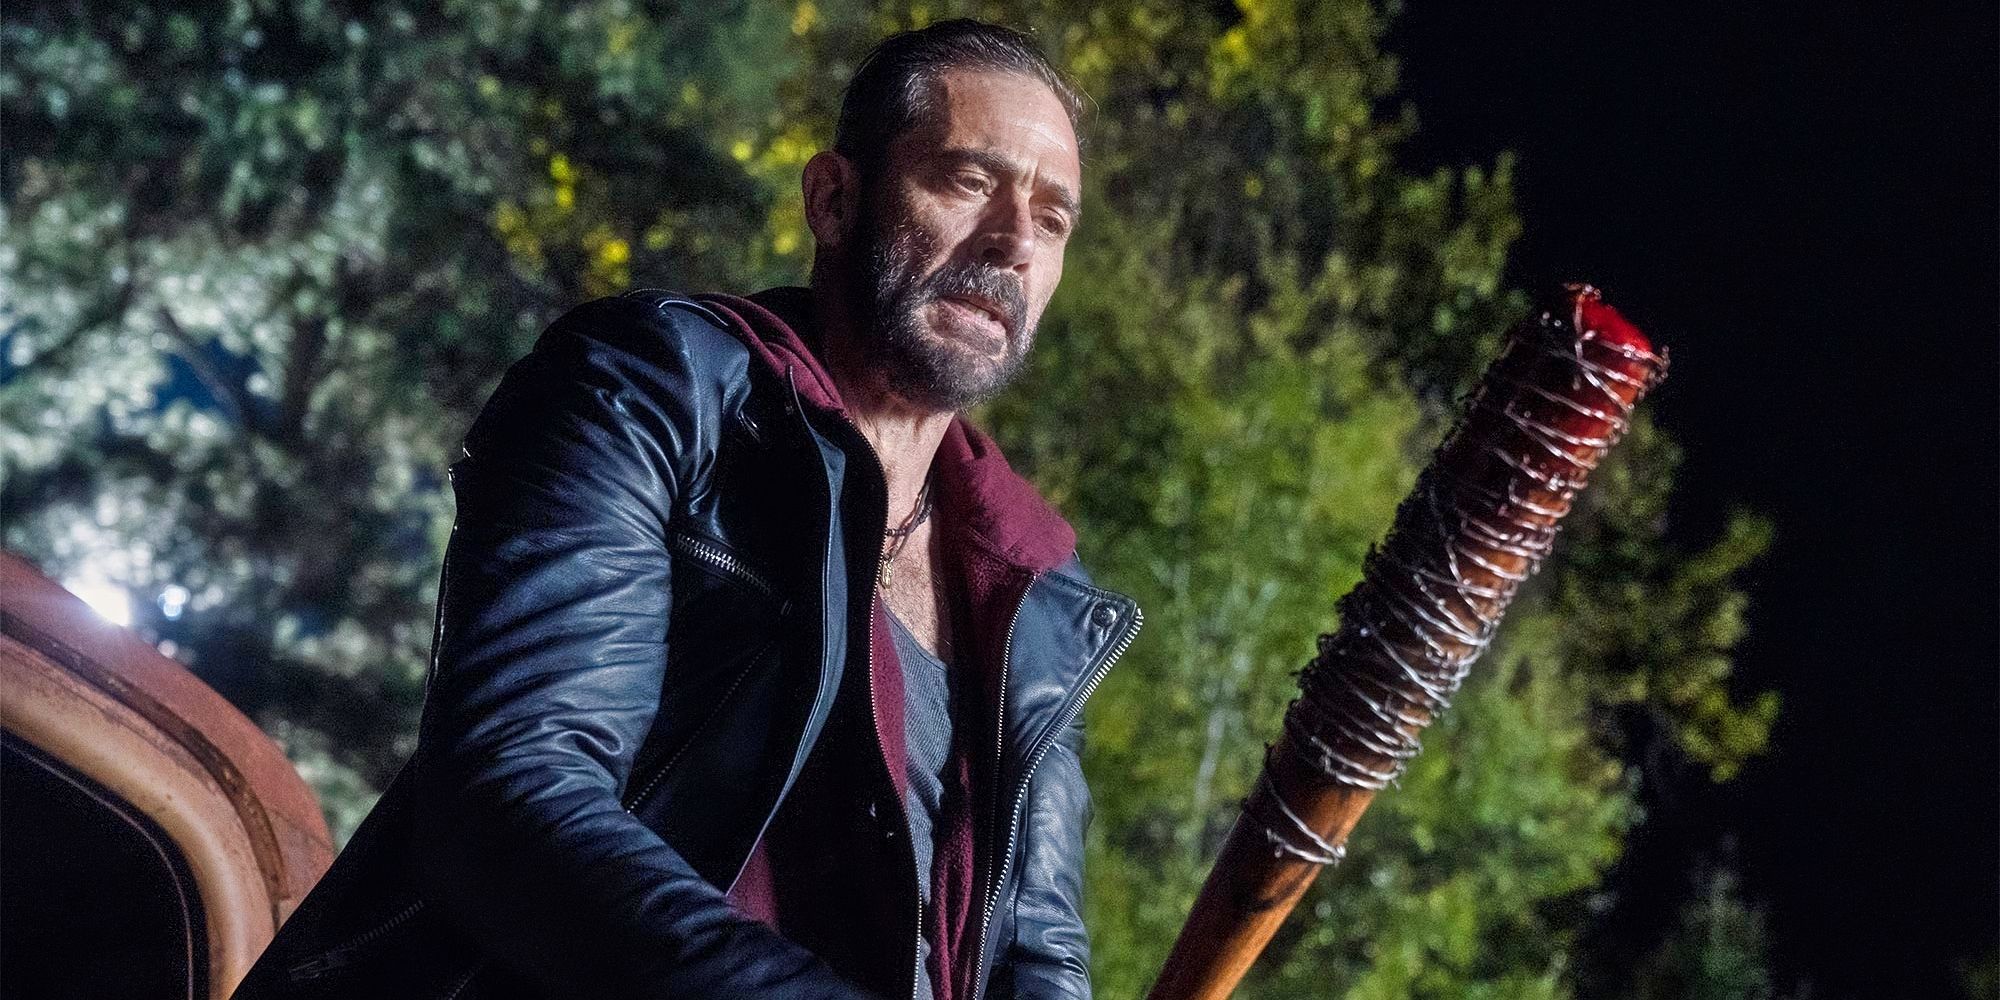 Negan holding Lucille in The Walking Dead